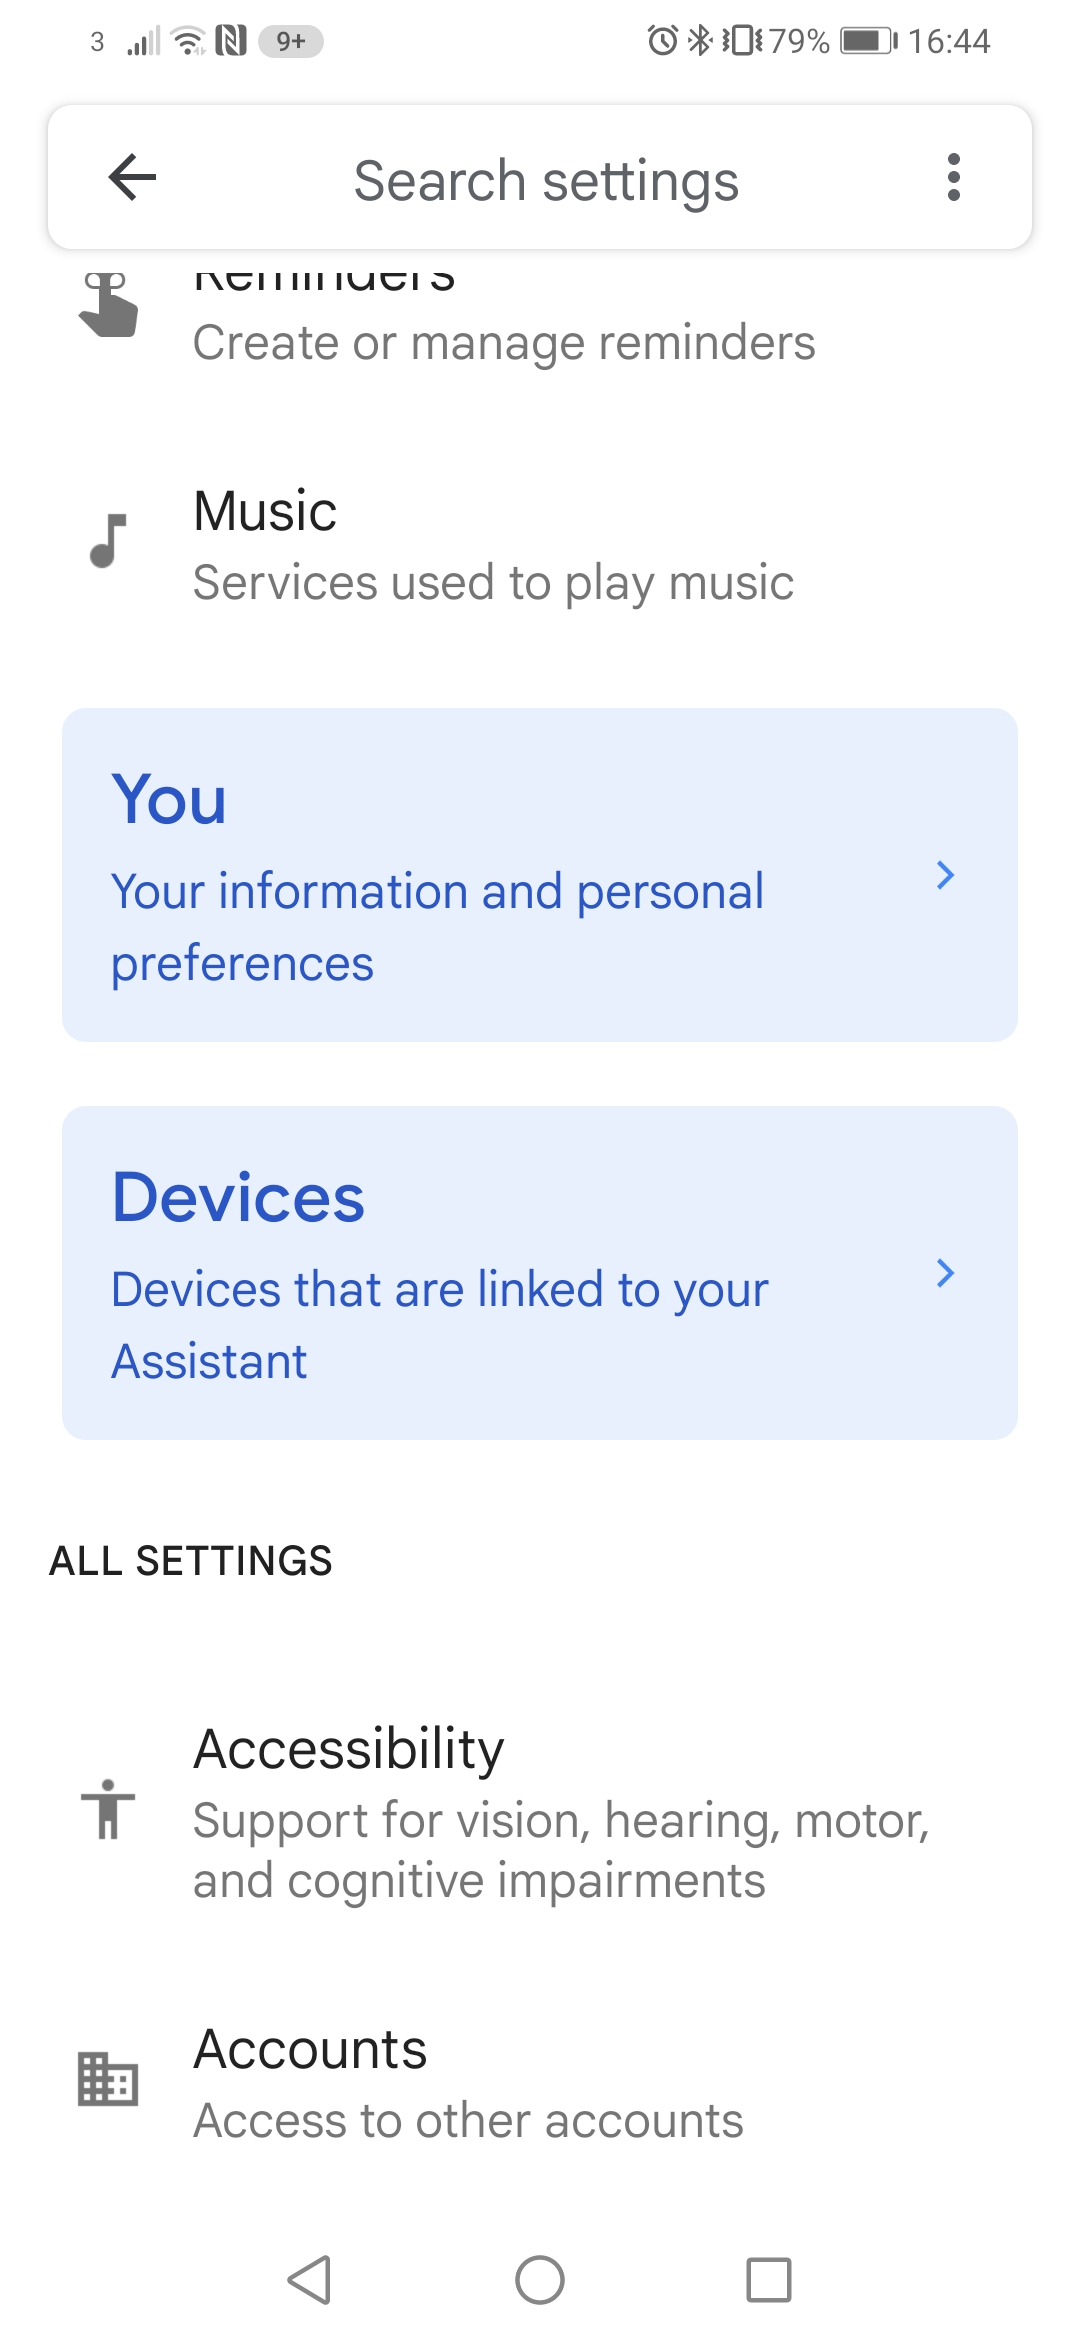 Scroll down to Devices